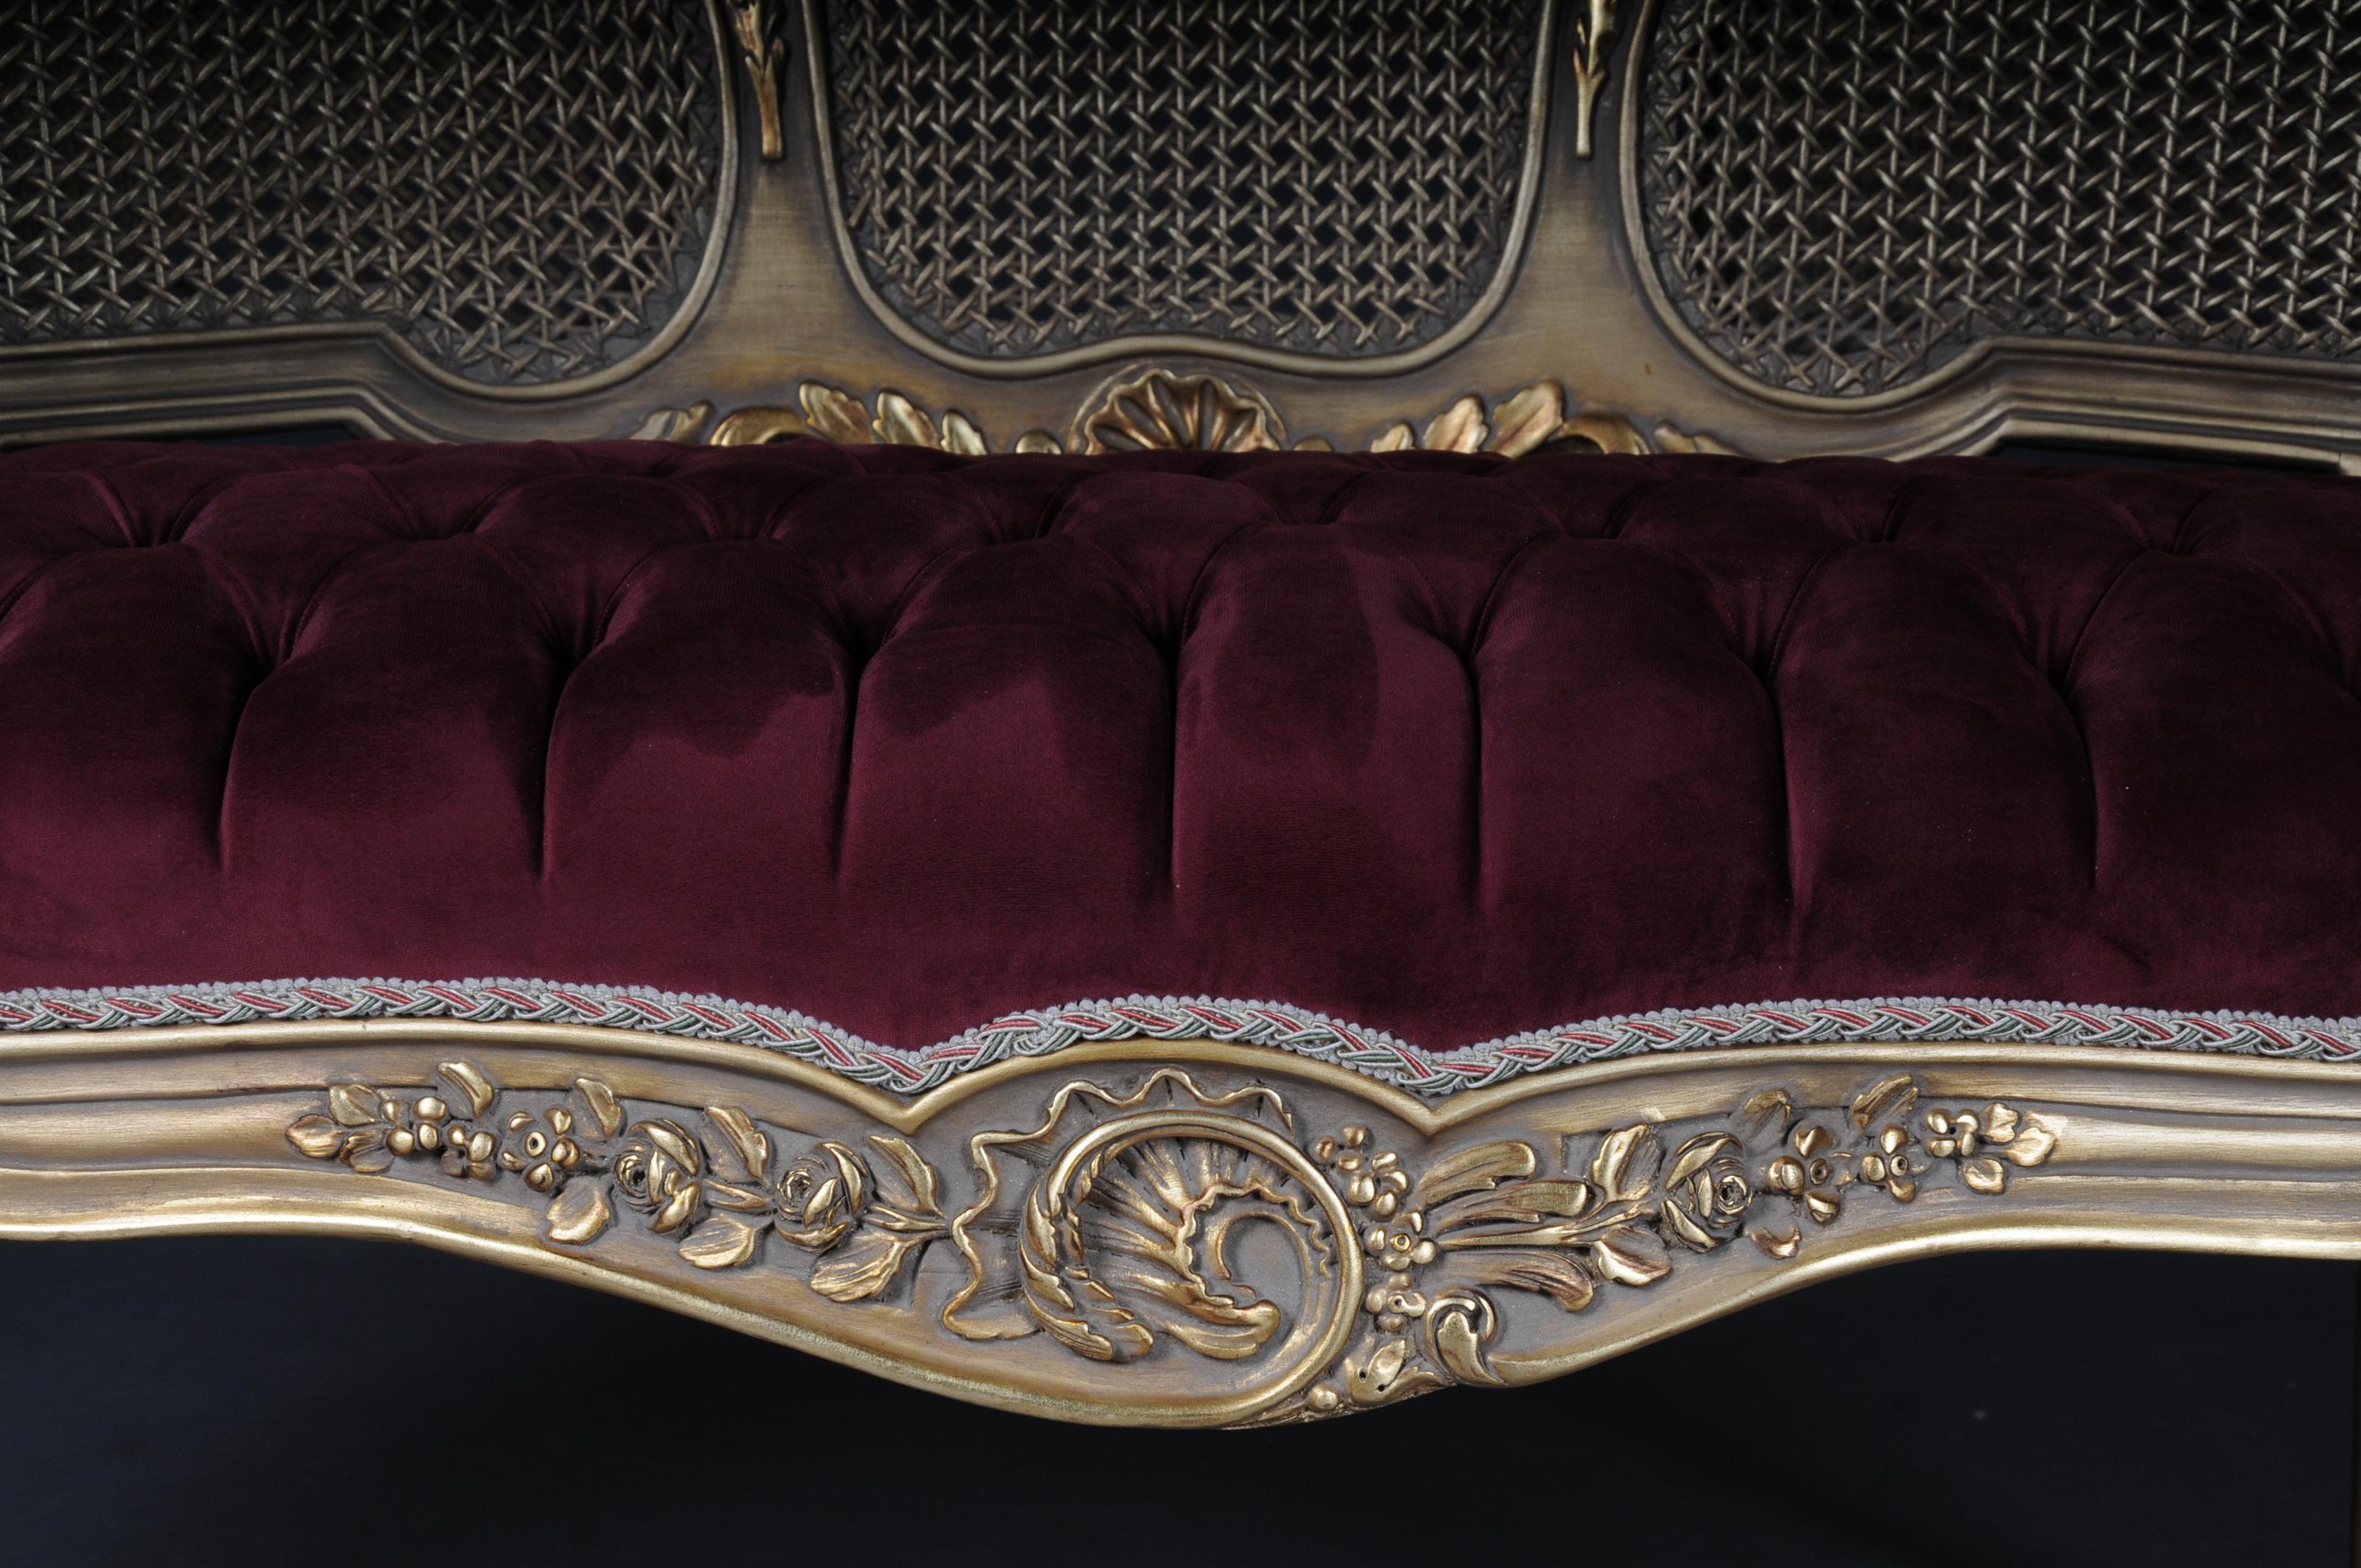 Pretty baroque bench, sofa in Louis XV style.

Petite French bench, sofa in the Louis XV style. Semicircular rising, plaited backrest framing with rocaille crowning. Profiled frame on curved legs.

(B-Dom-104).